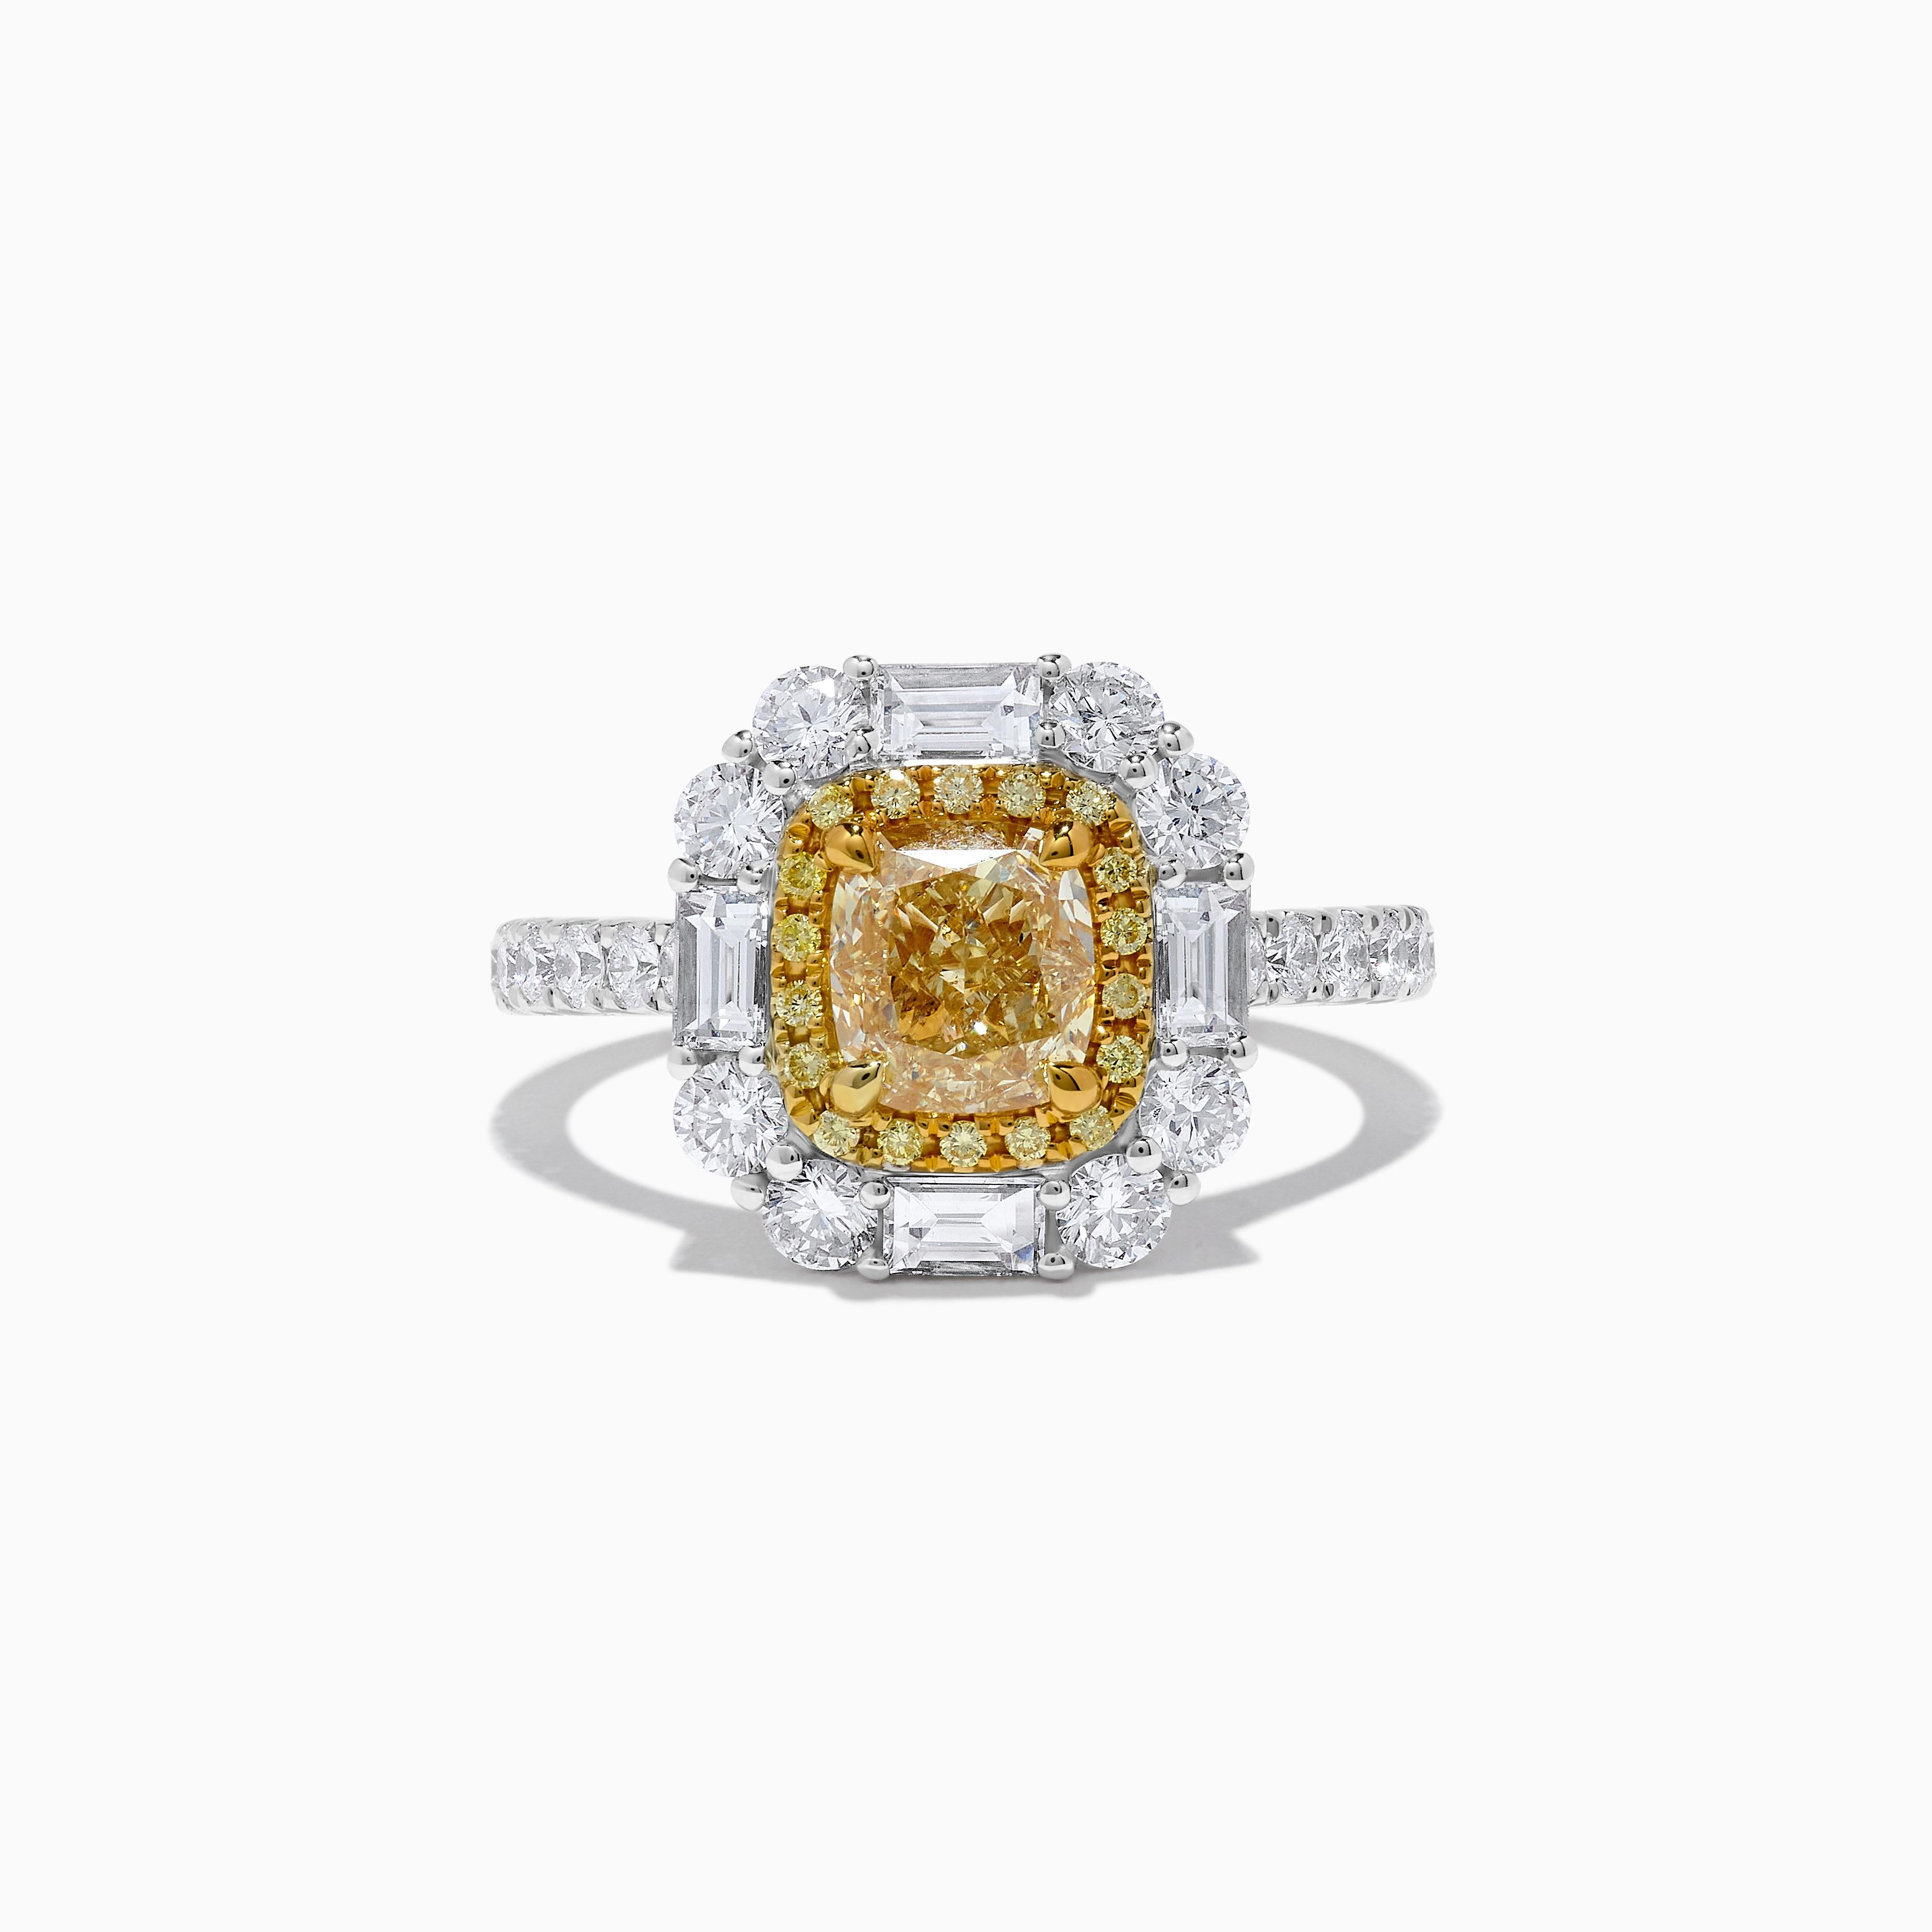 RareGemWorld's classic GIA certified diamond ring. Mounted in a beautiful 18K Yellow and White Gold setting with a natural cushion cut yellow diamond. The yellow diamond is surrounded by natural baguette cut white diamonds, round natural yellow